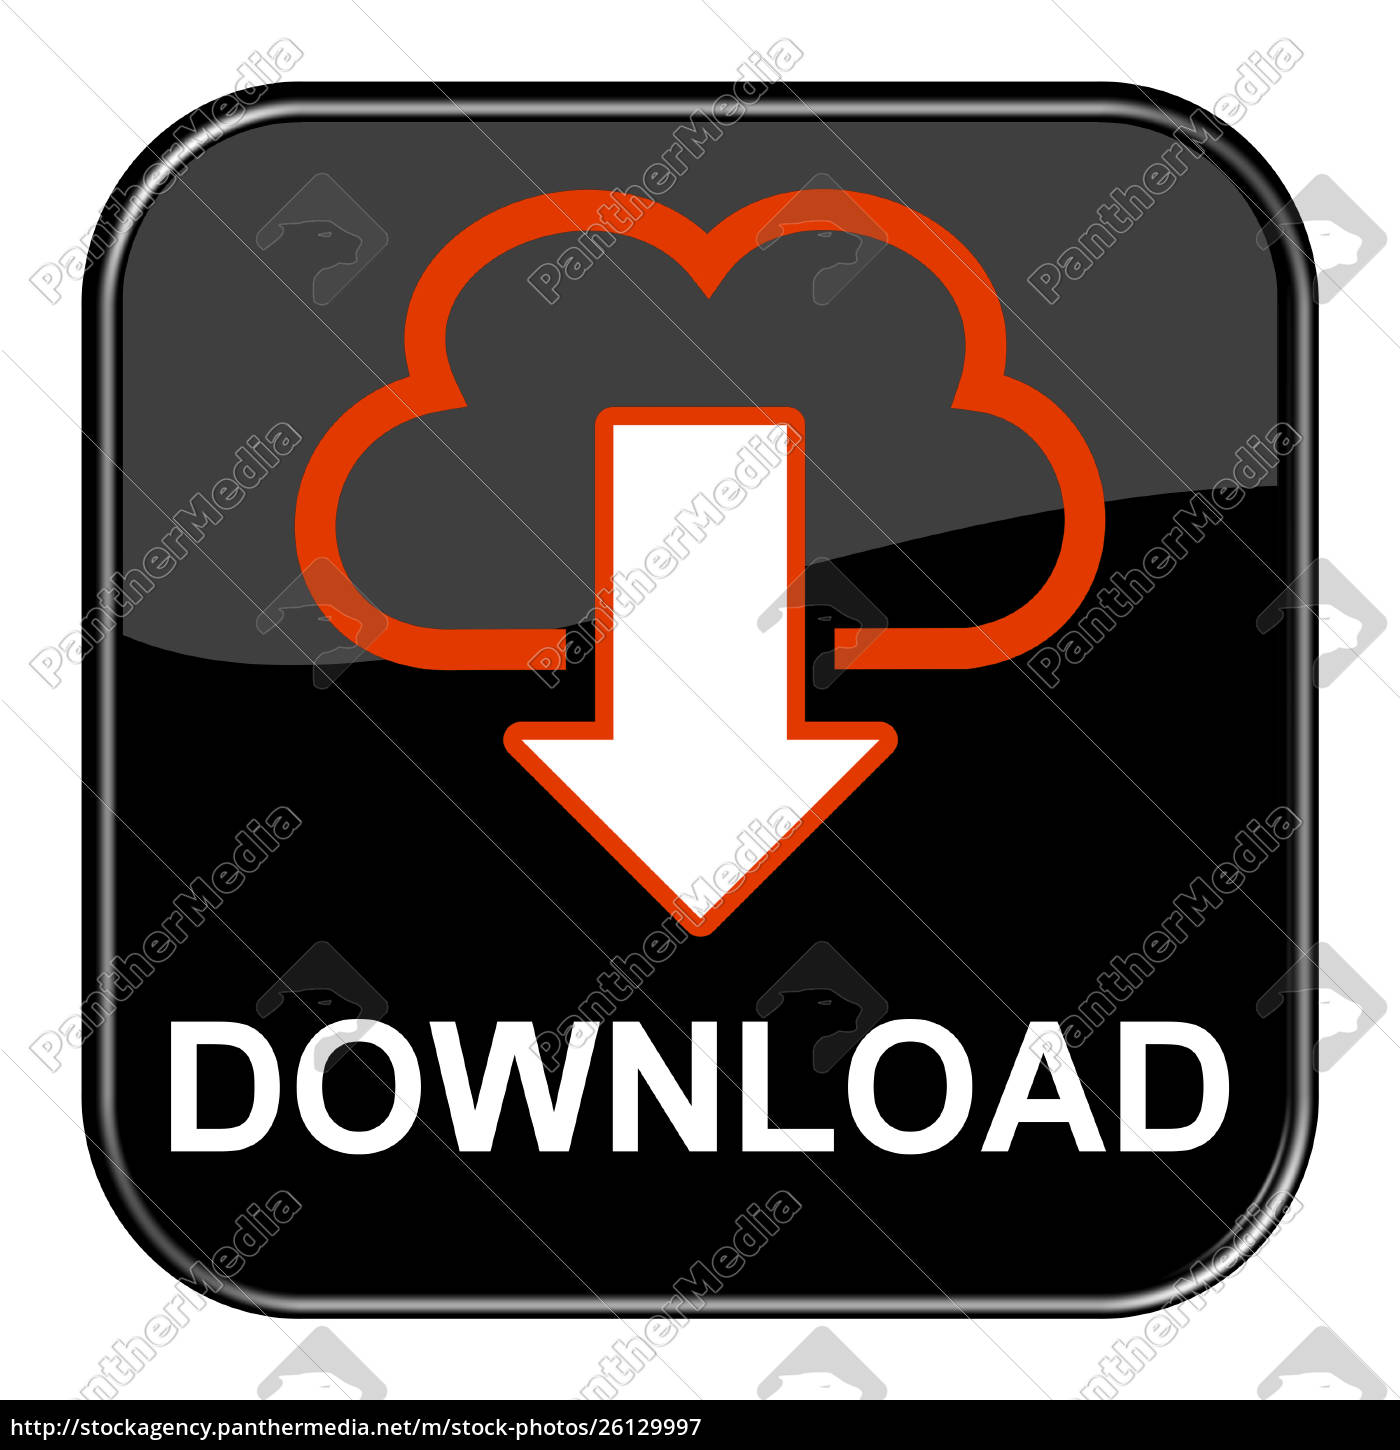 Download Button Cloud With Arrow Royalty Free Image 26129997 Panthermedia Stock Agency